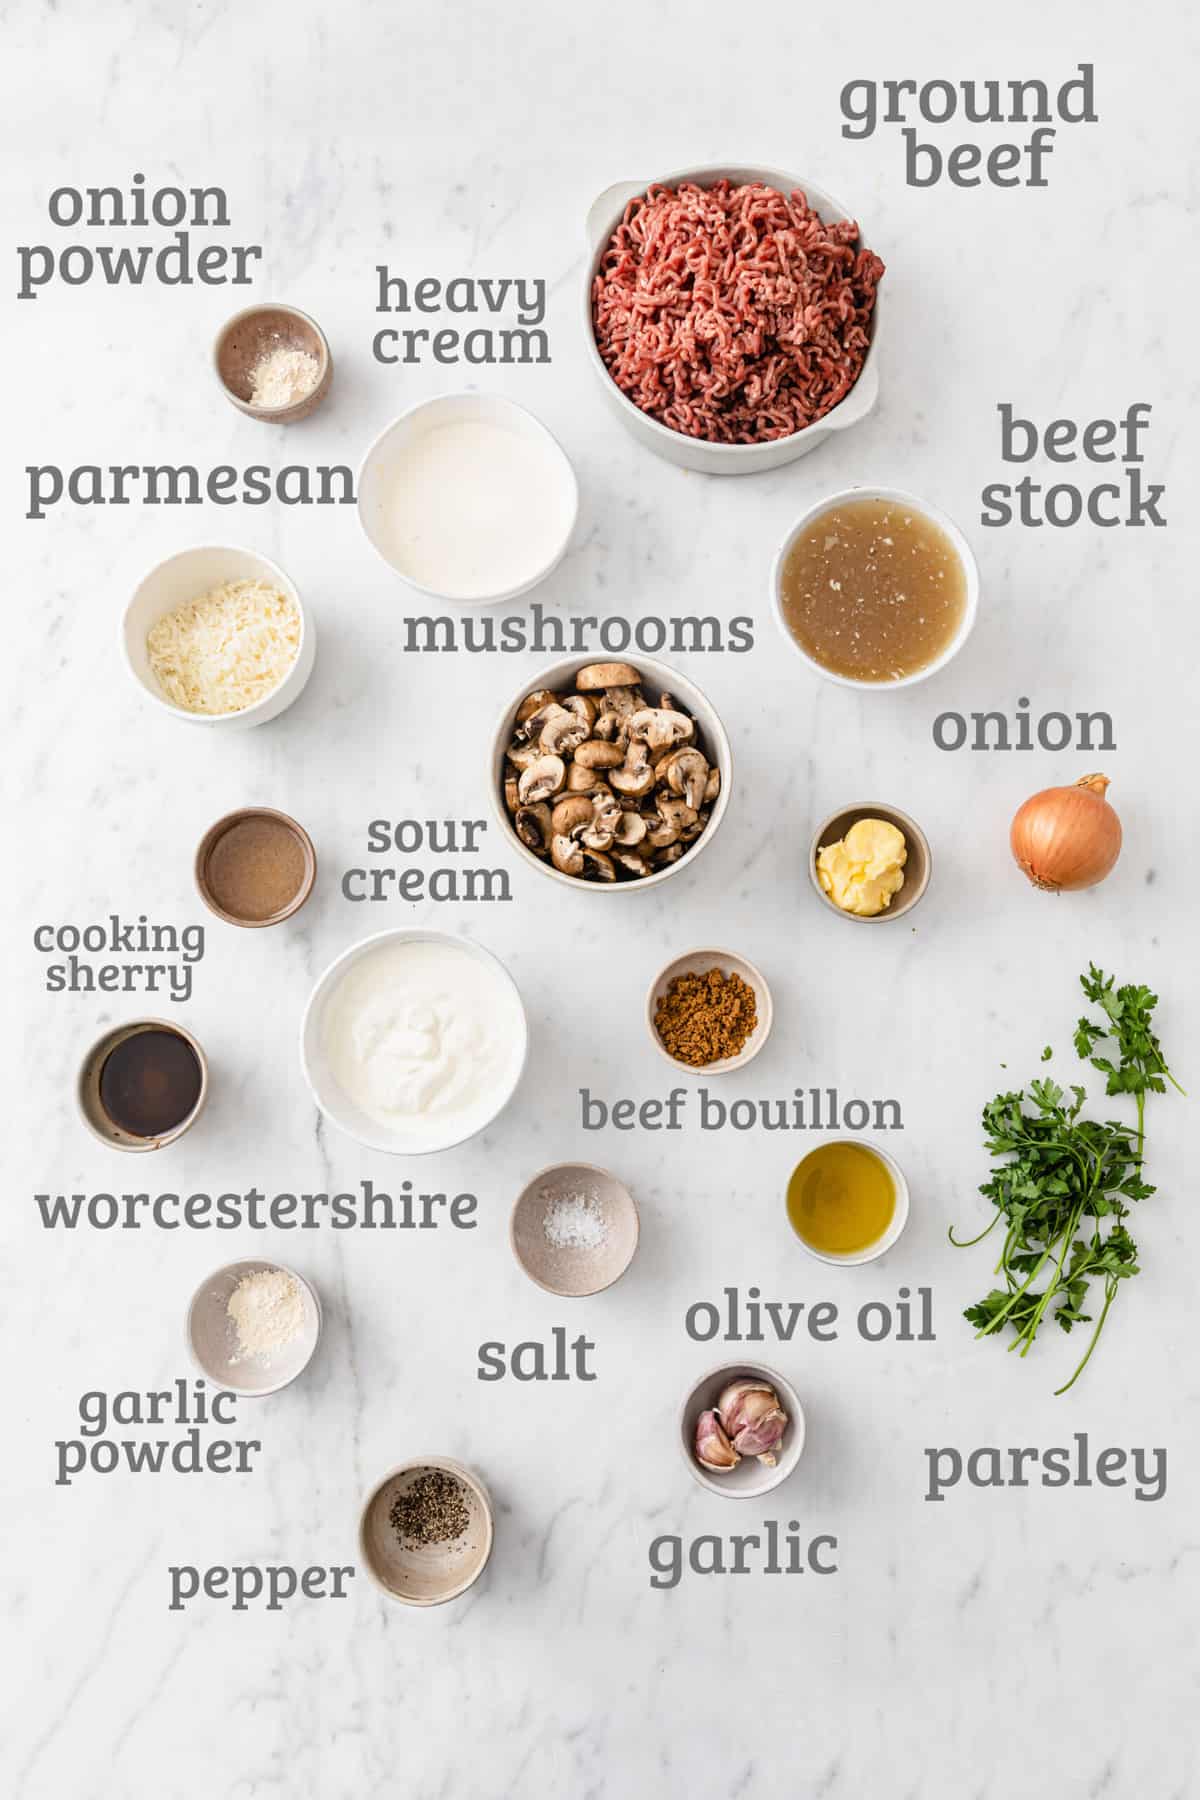 Ingredients for stroganoff burgers - beef, mushrooms, onions, butter, garlic, sour cream, cheese, parsley